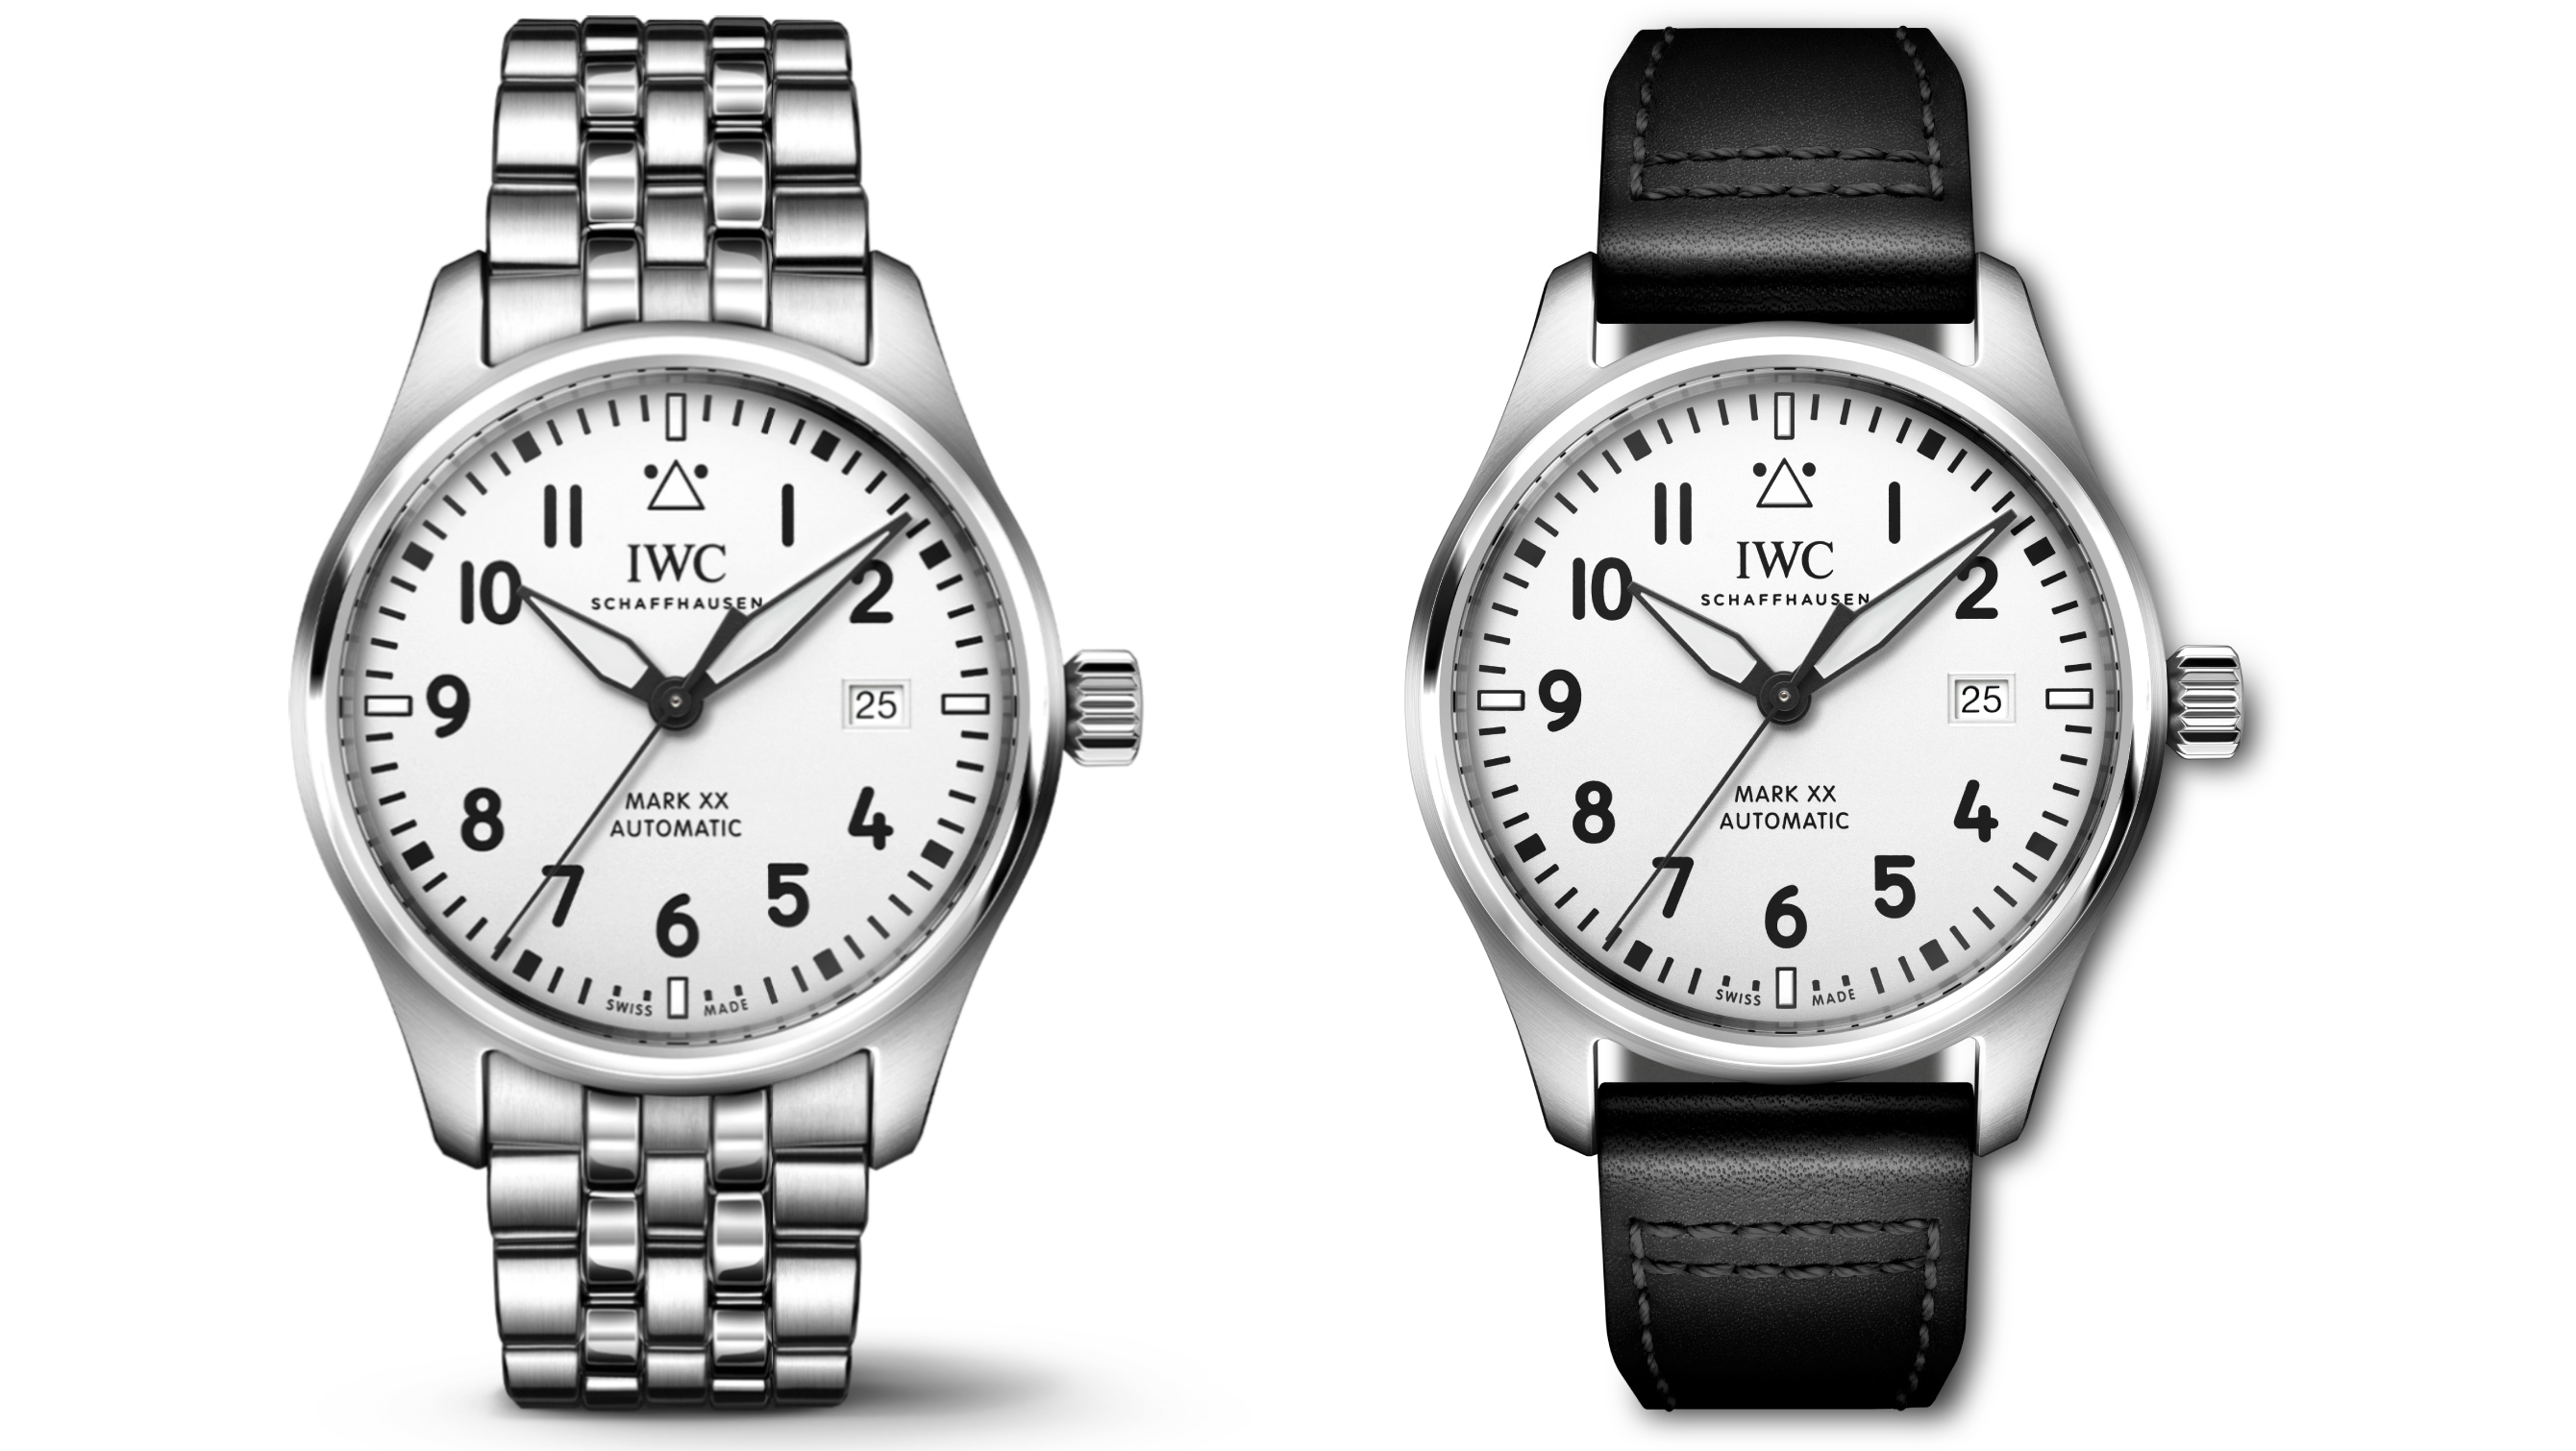 IWC celebrates 75 years of the Mark series with a silver-dialled Mark XX